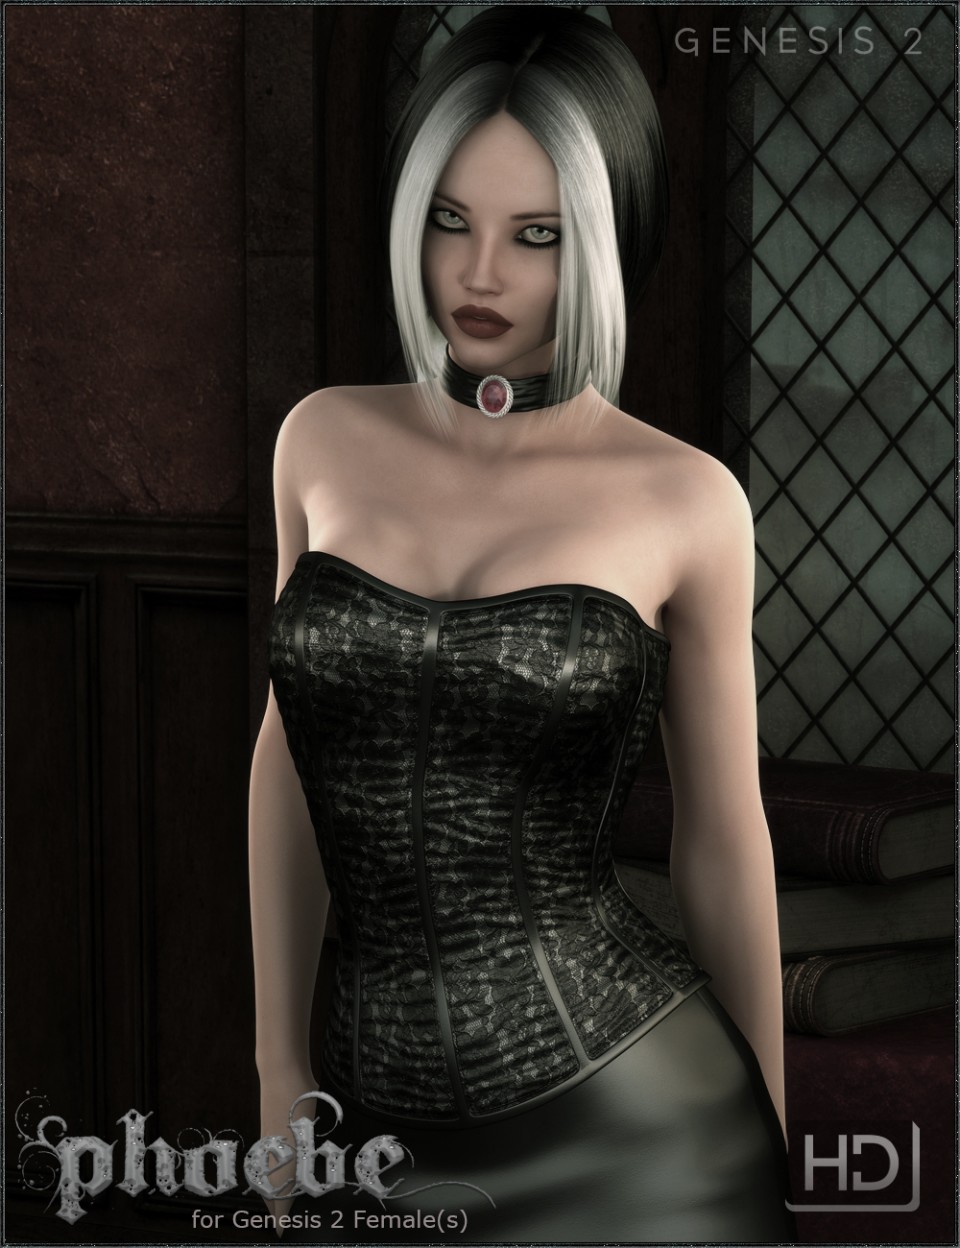 Phoebe HD Bundle - Gothic Character, Outfit and Hair